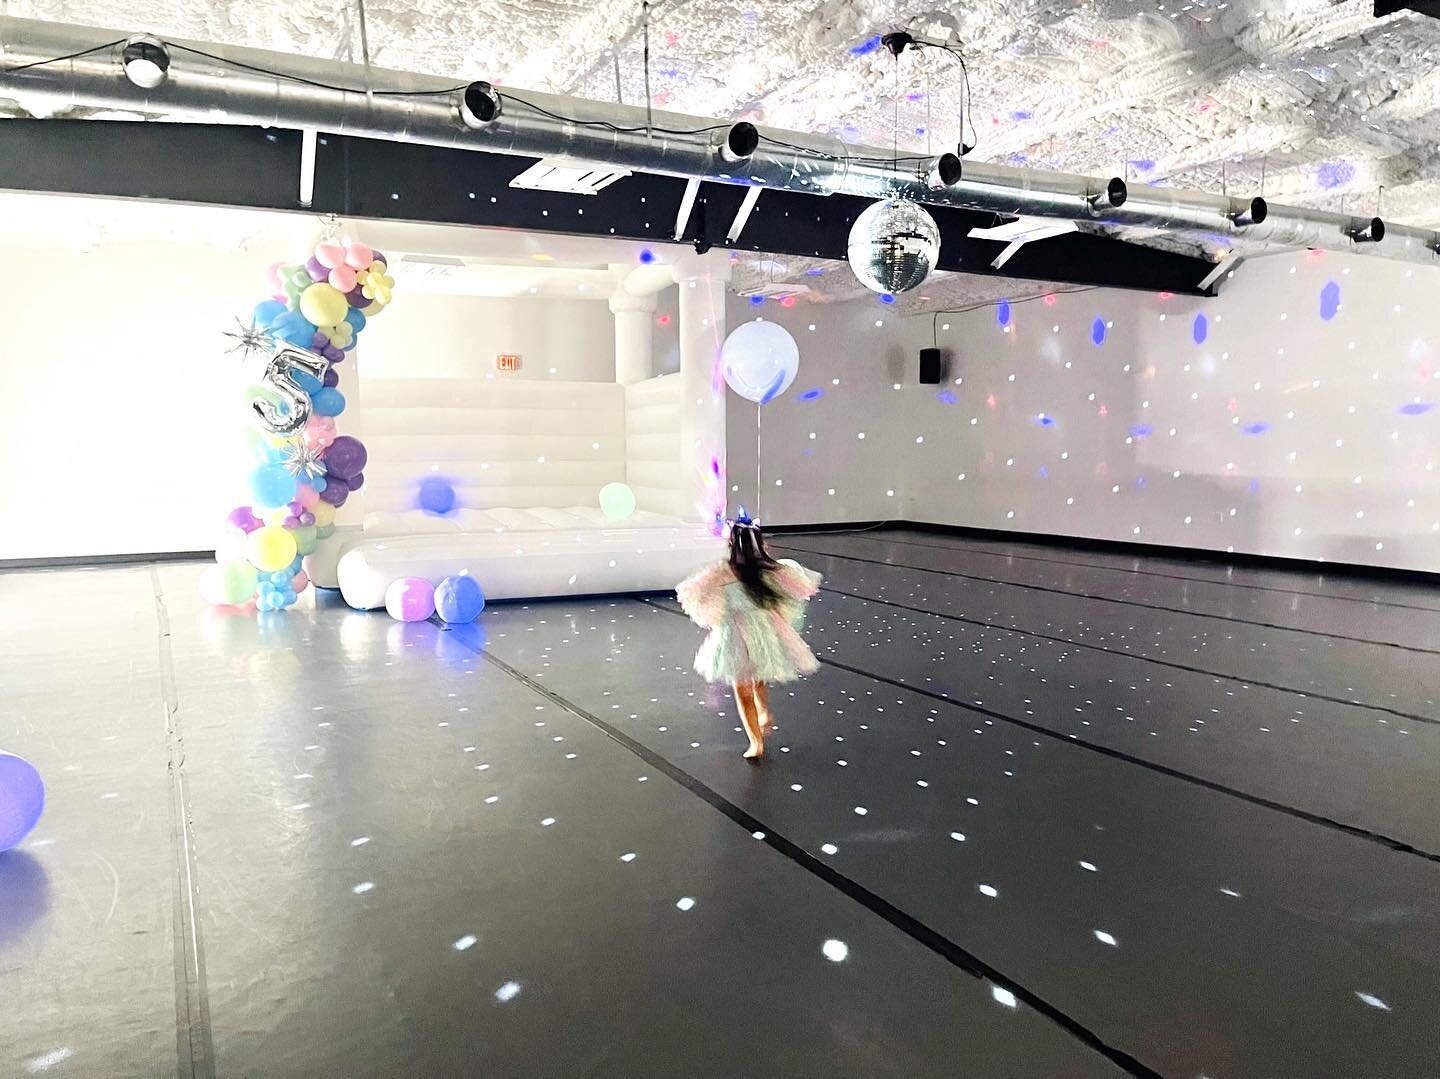 Surprise! Book your bounce house today and get another hour for free! That&rsquo;s four hours for the price of three for today only! 

🎈@littlepnuts

#afloat #bouncehouse #nolaparty #metairie #whitebouncehouse #birthdaypartyideas #familyfun #souther